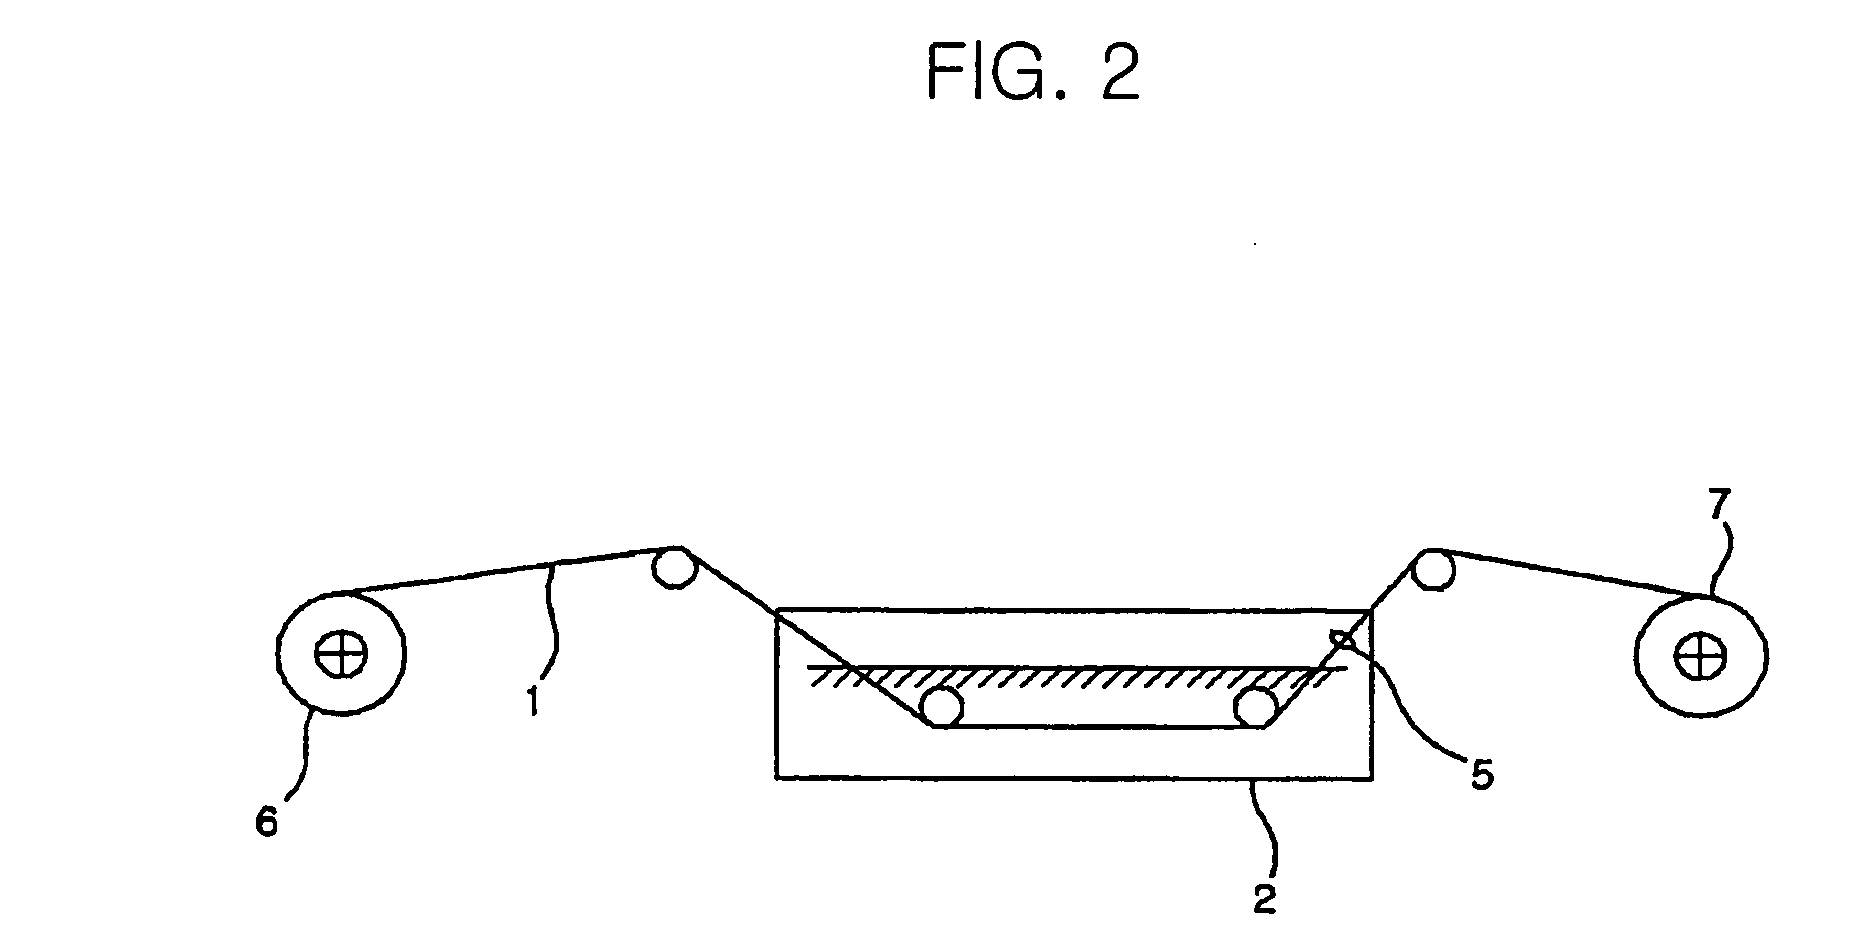 Method of manufacturing zinc-coated electrode wire for electric discharge processors using hot dip galvanizing process